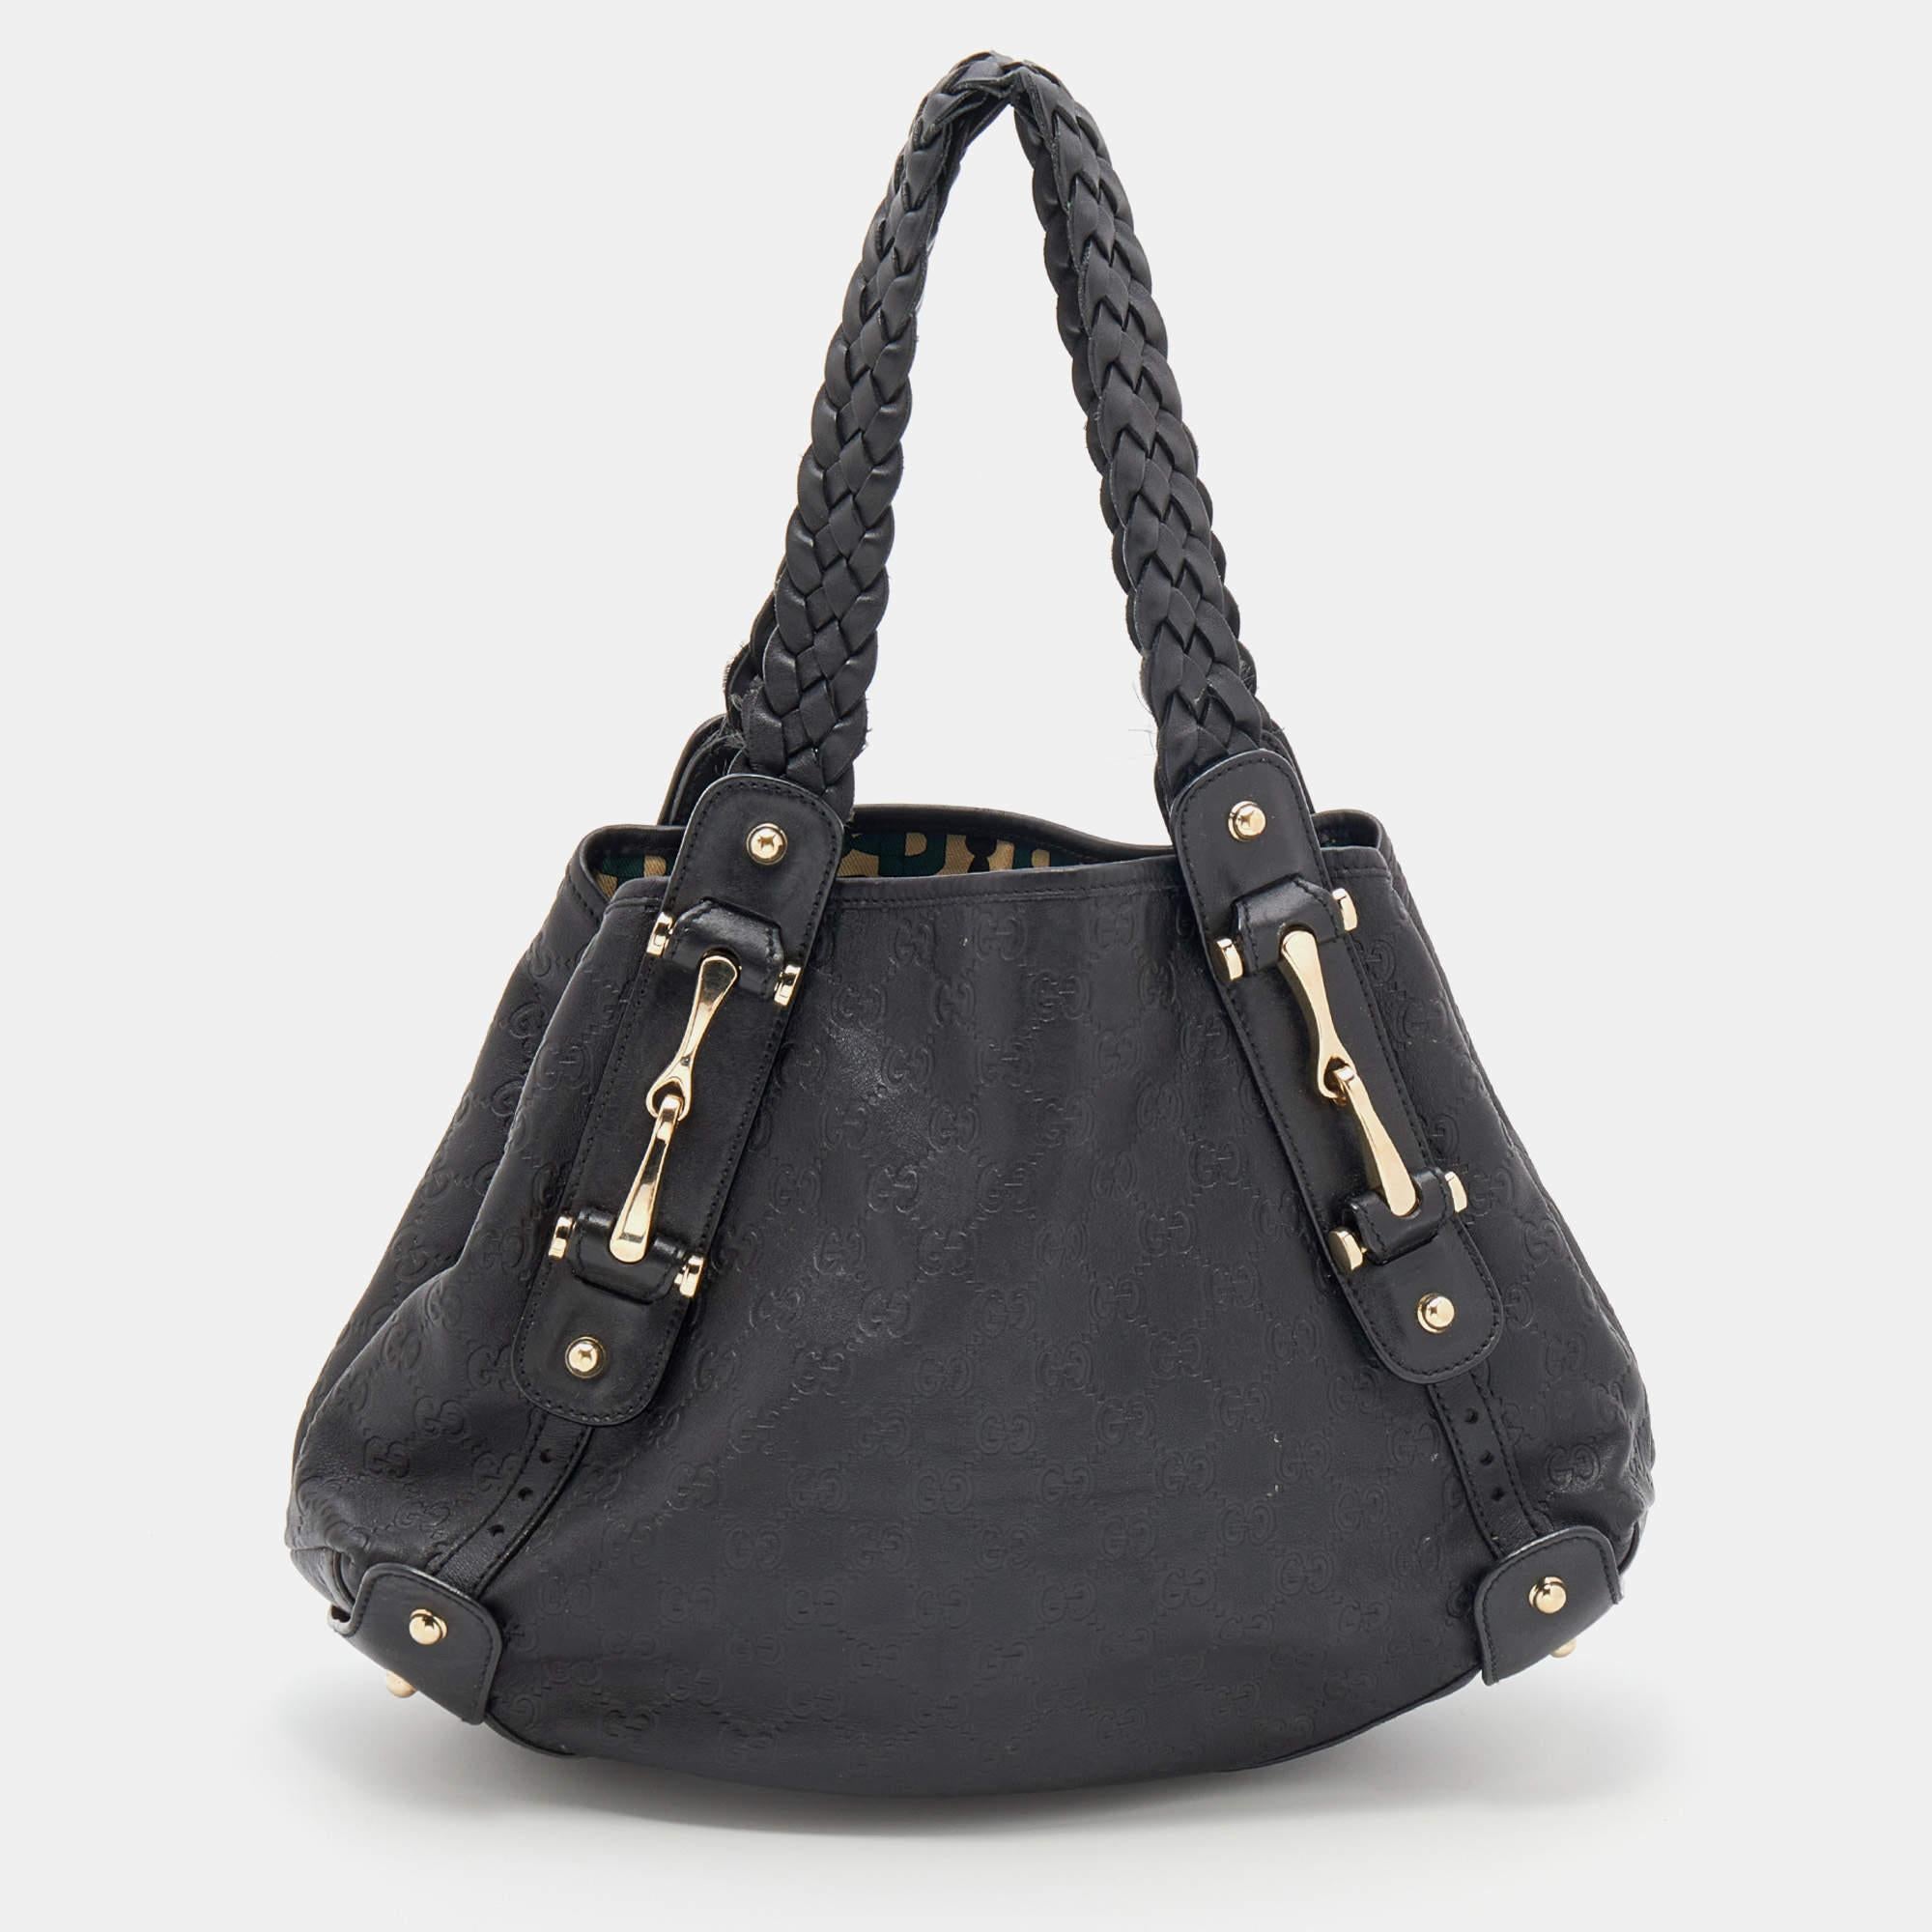 Take your style a notch higher with this Pelham shoulder bag from Gucci. Cut from Guccissima leather, the lovely bag features two braided handles, a spacious fabric interior, and gold-tone details. It is perfect for daily use.

